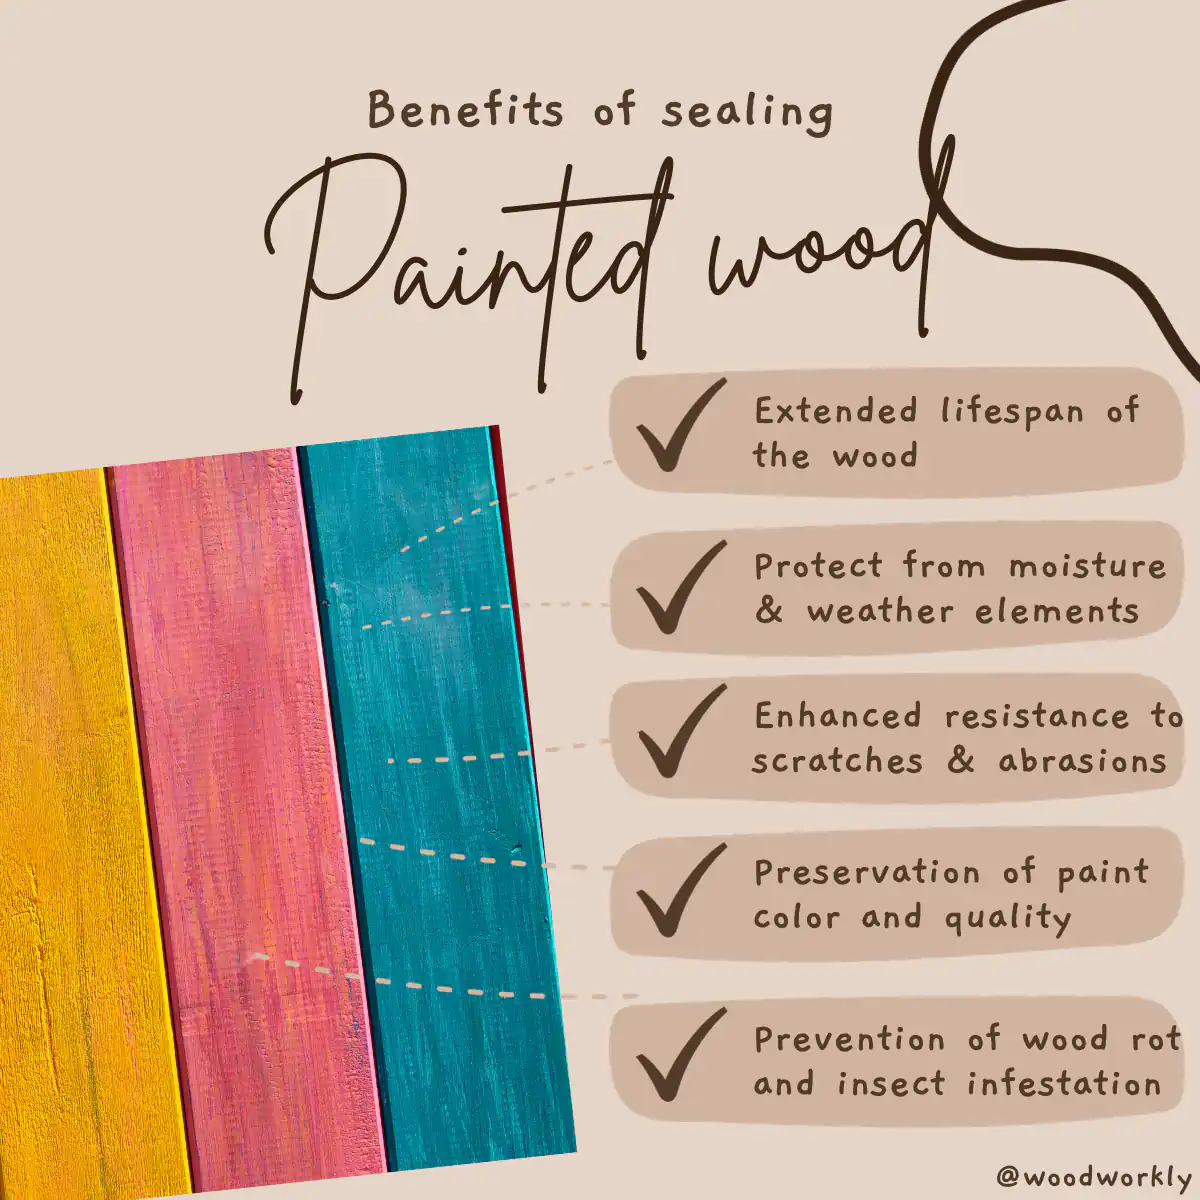 Benefits of sealing painted wood